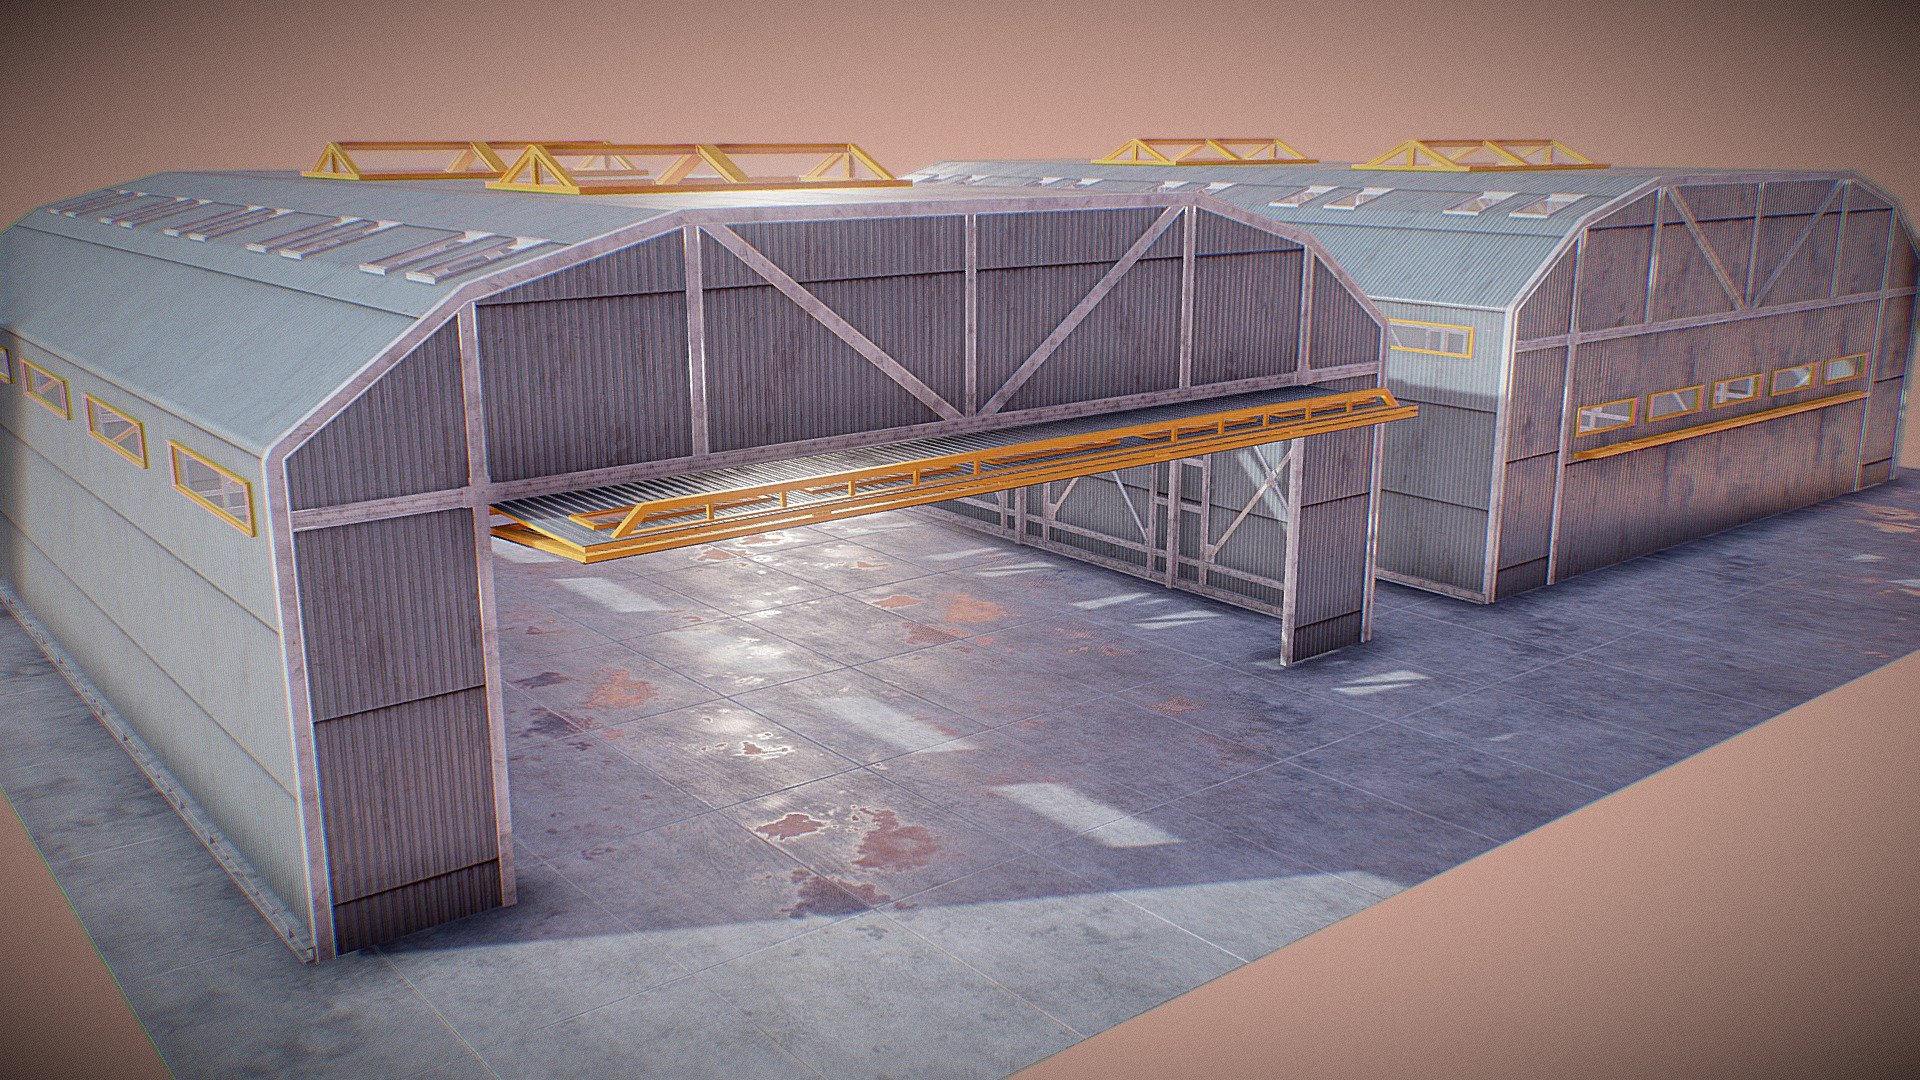 Game - Ready Hangar

1024x1024 Textures (BaseColor, Normal, Roughness)

Mid-Low poly count, suitable for PC, Console, VR and Mobile



Check out other similar assets:

Large Modular Warehouse

Small Warehouse

Large Modern Warehouse

Large Warehouse

Storage Building

Small Garage Building

Garage Building
 - Hangar - Buy Royalty Free 3D model by Serhii3D 3d model